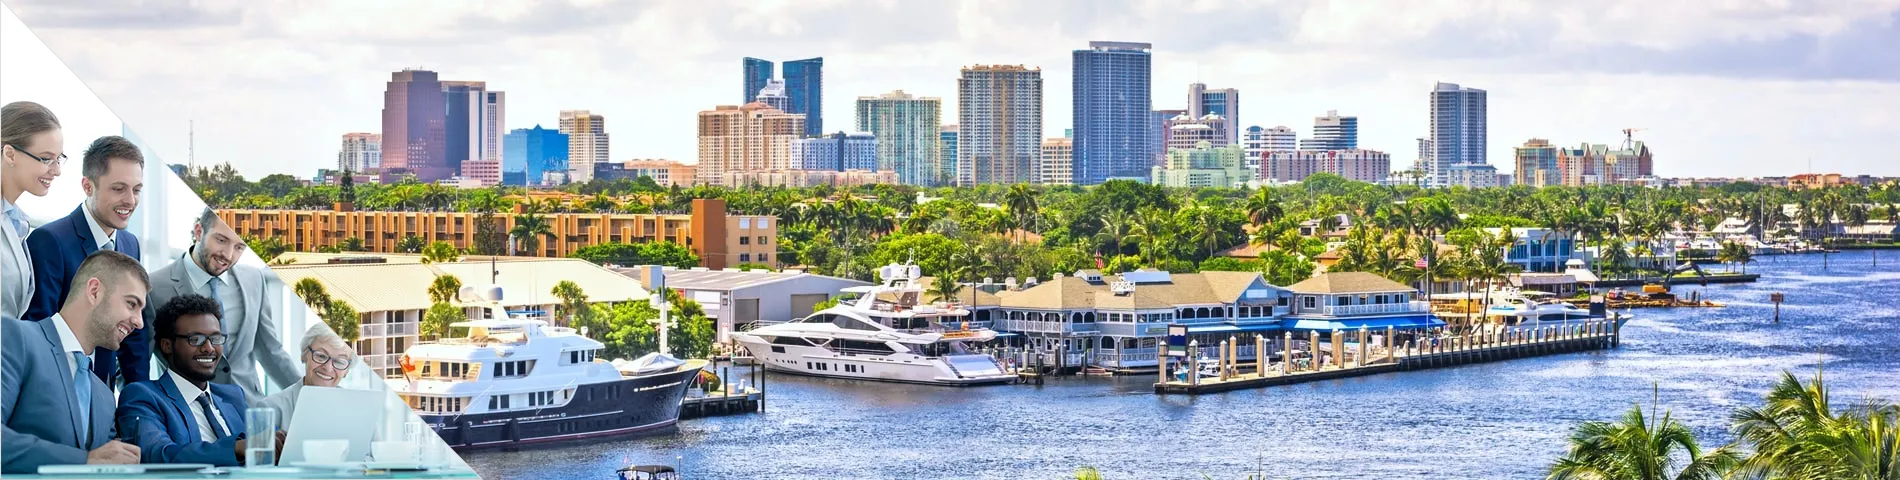 Fort Lauderdale - Business Group